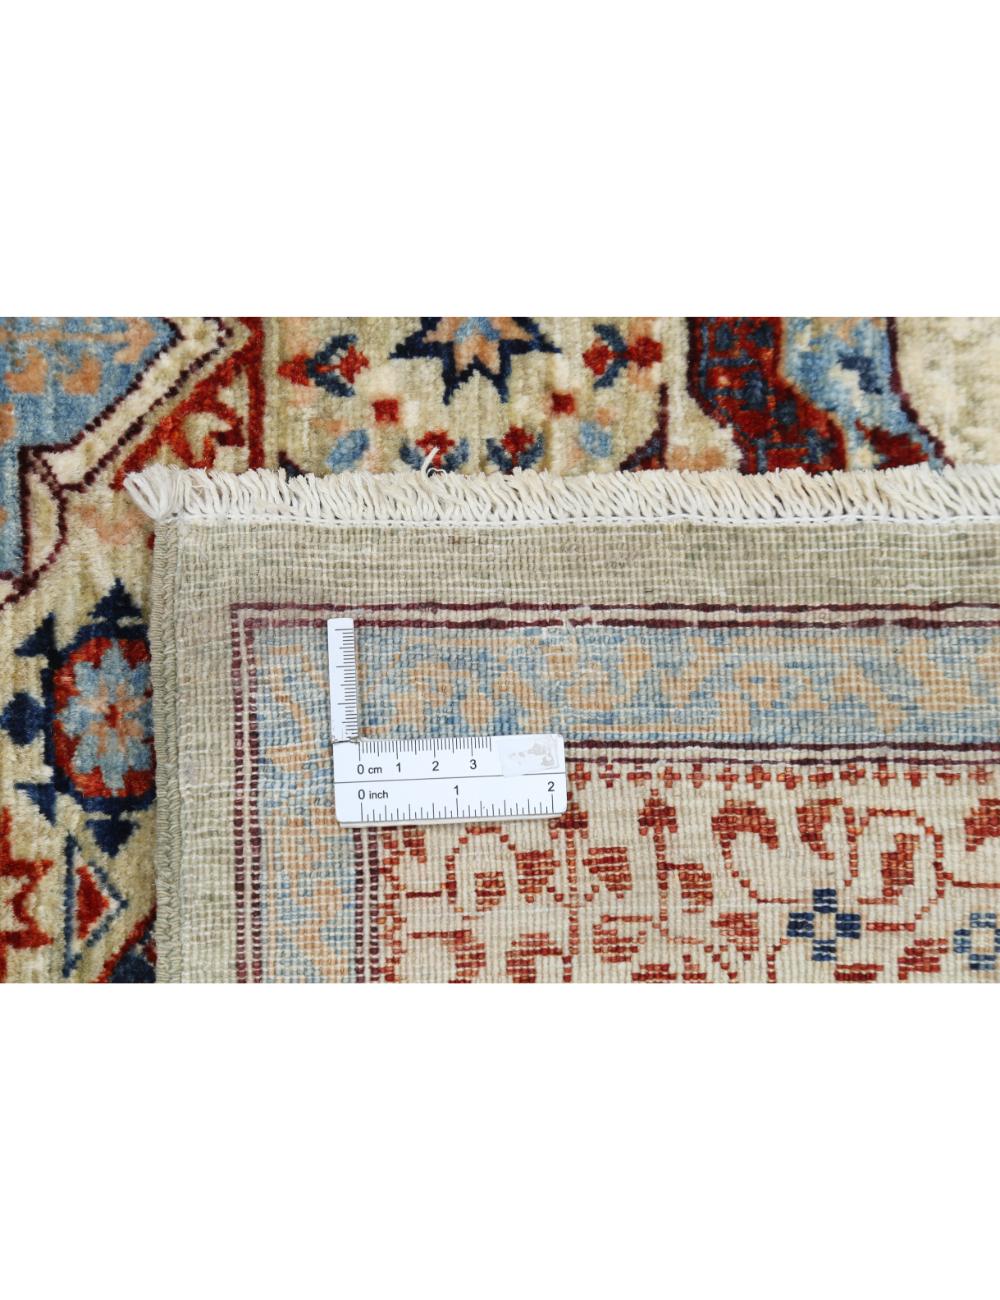 Mamluk 4' 11" X 6' 9" Hand-Knotted Wool Rug 4' 11" X 6' 9" (150 X 206) / Beige / Red